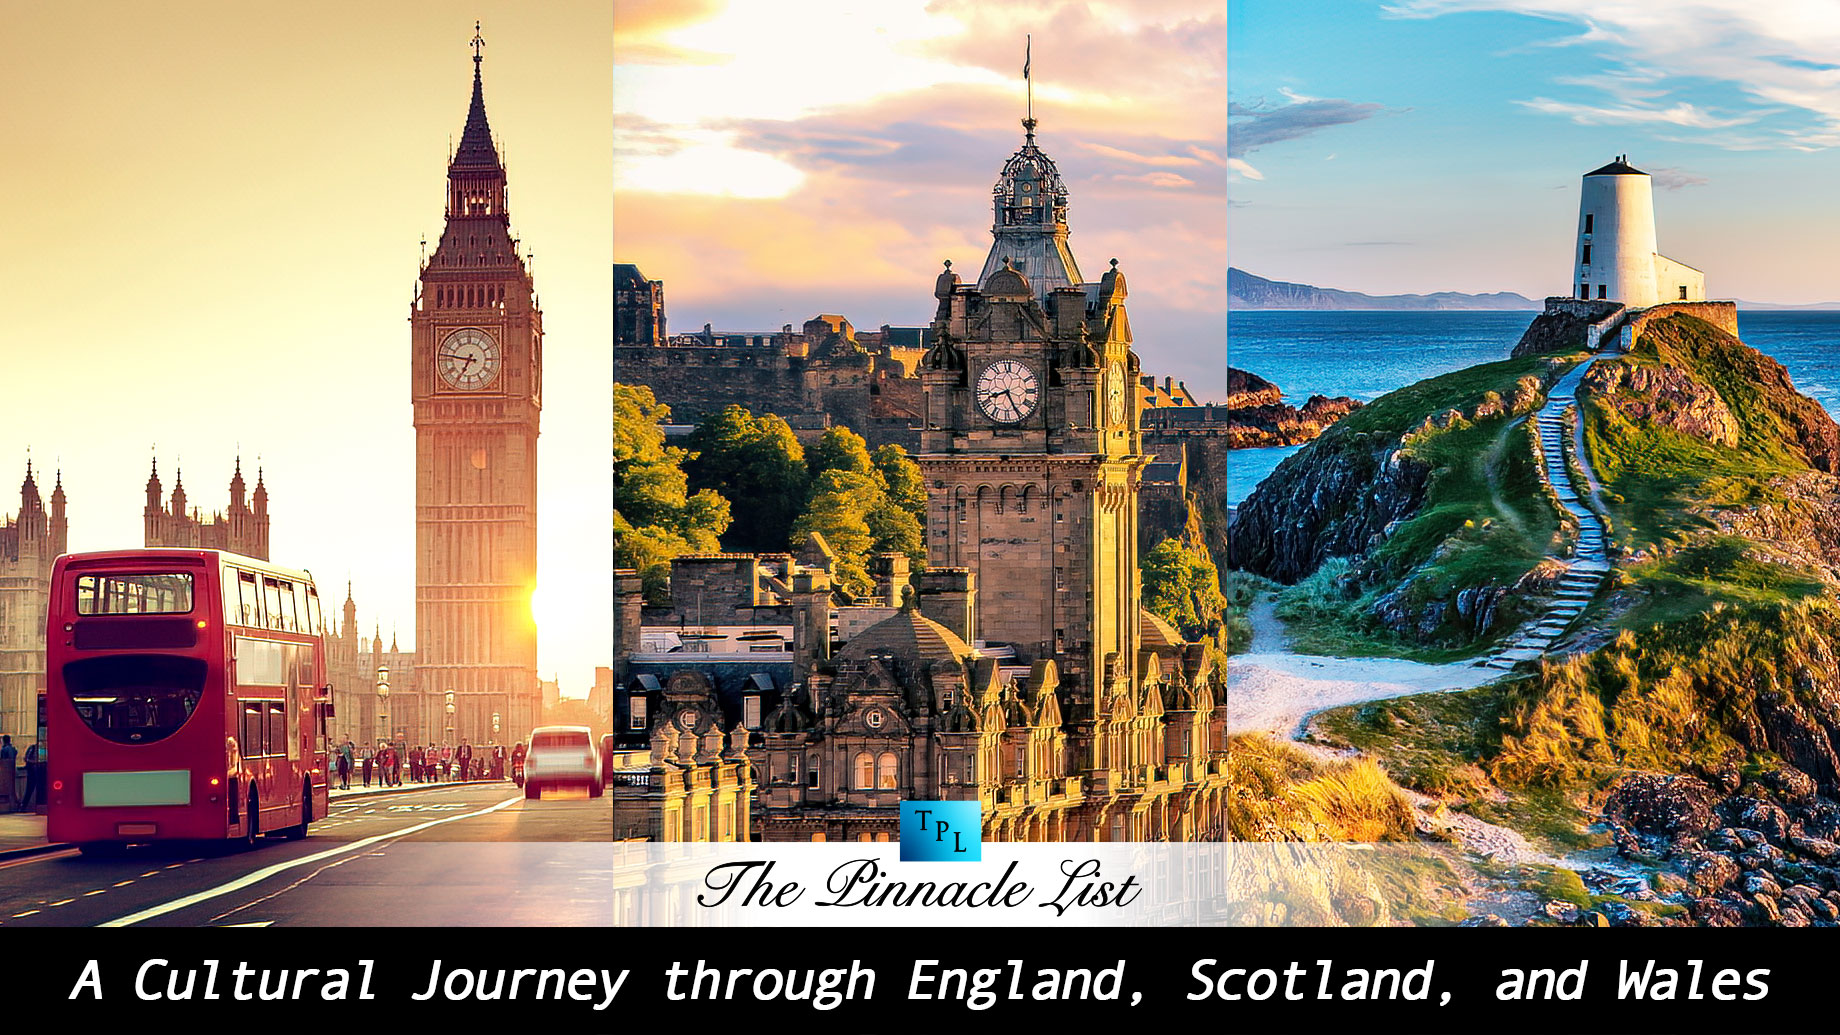 A Cultural Journey through England, Scotland, and Wales